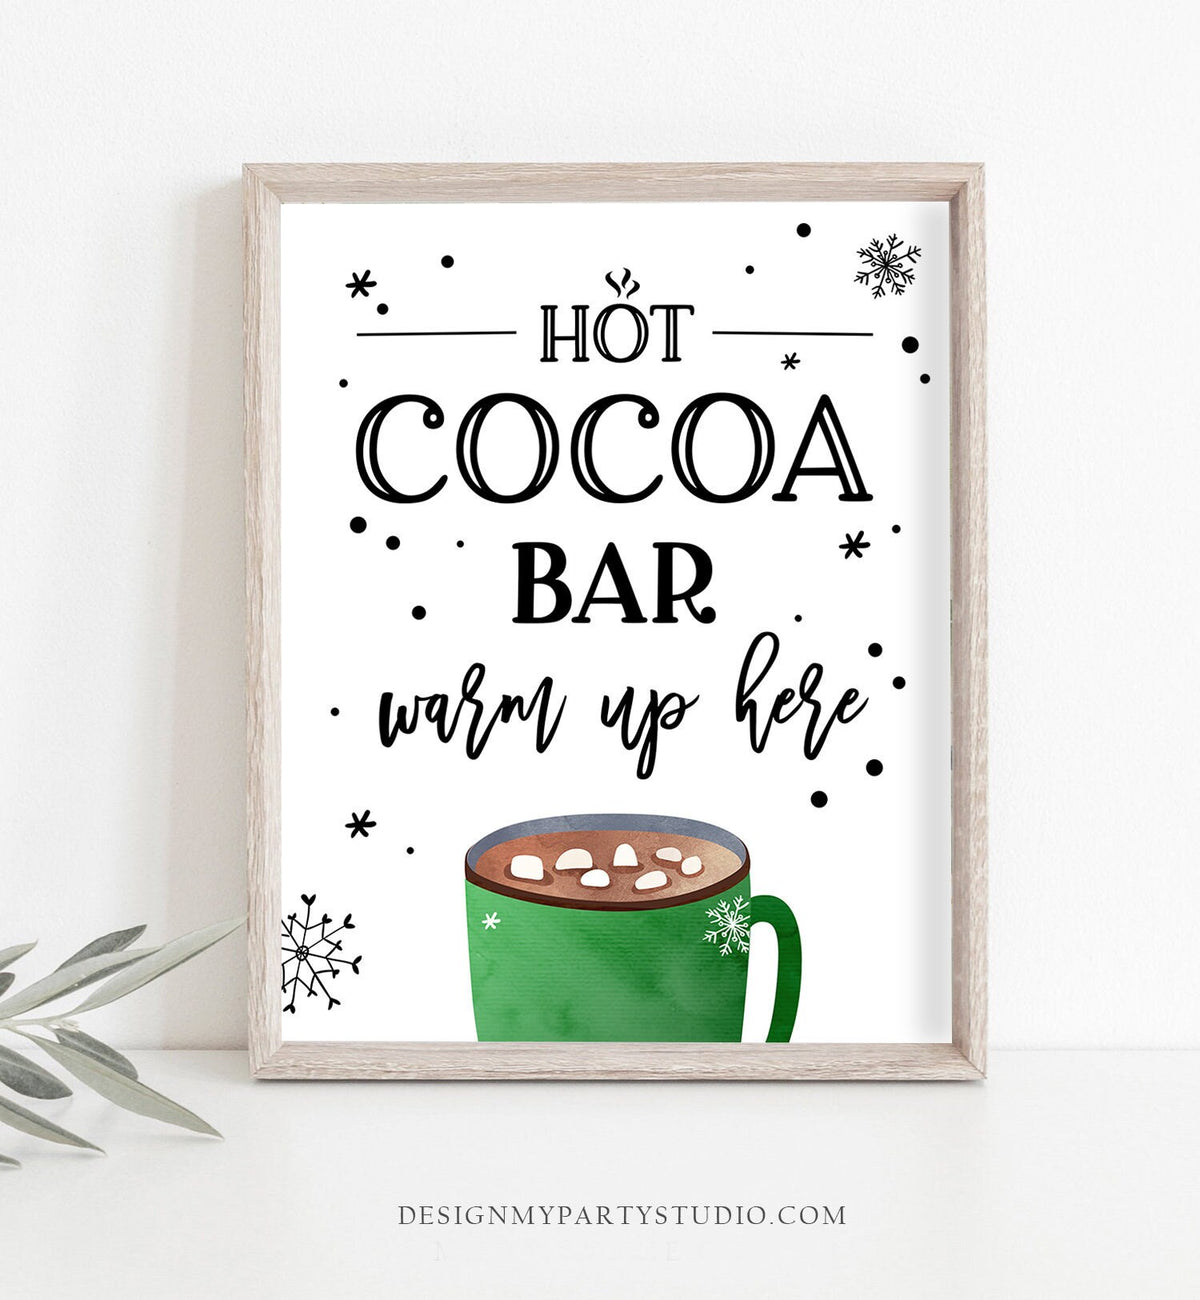 Hot Cocoa Bar Ideas (With Free Printables)